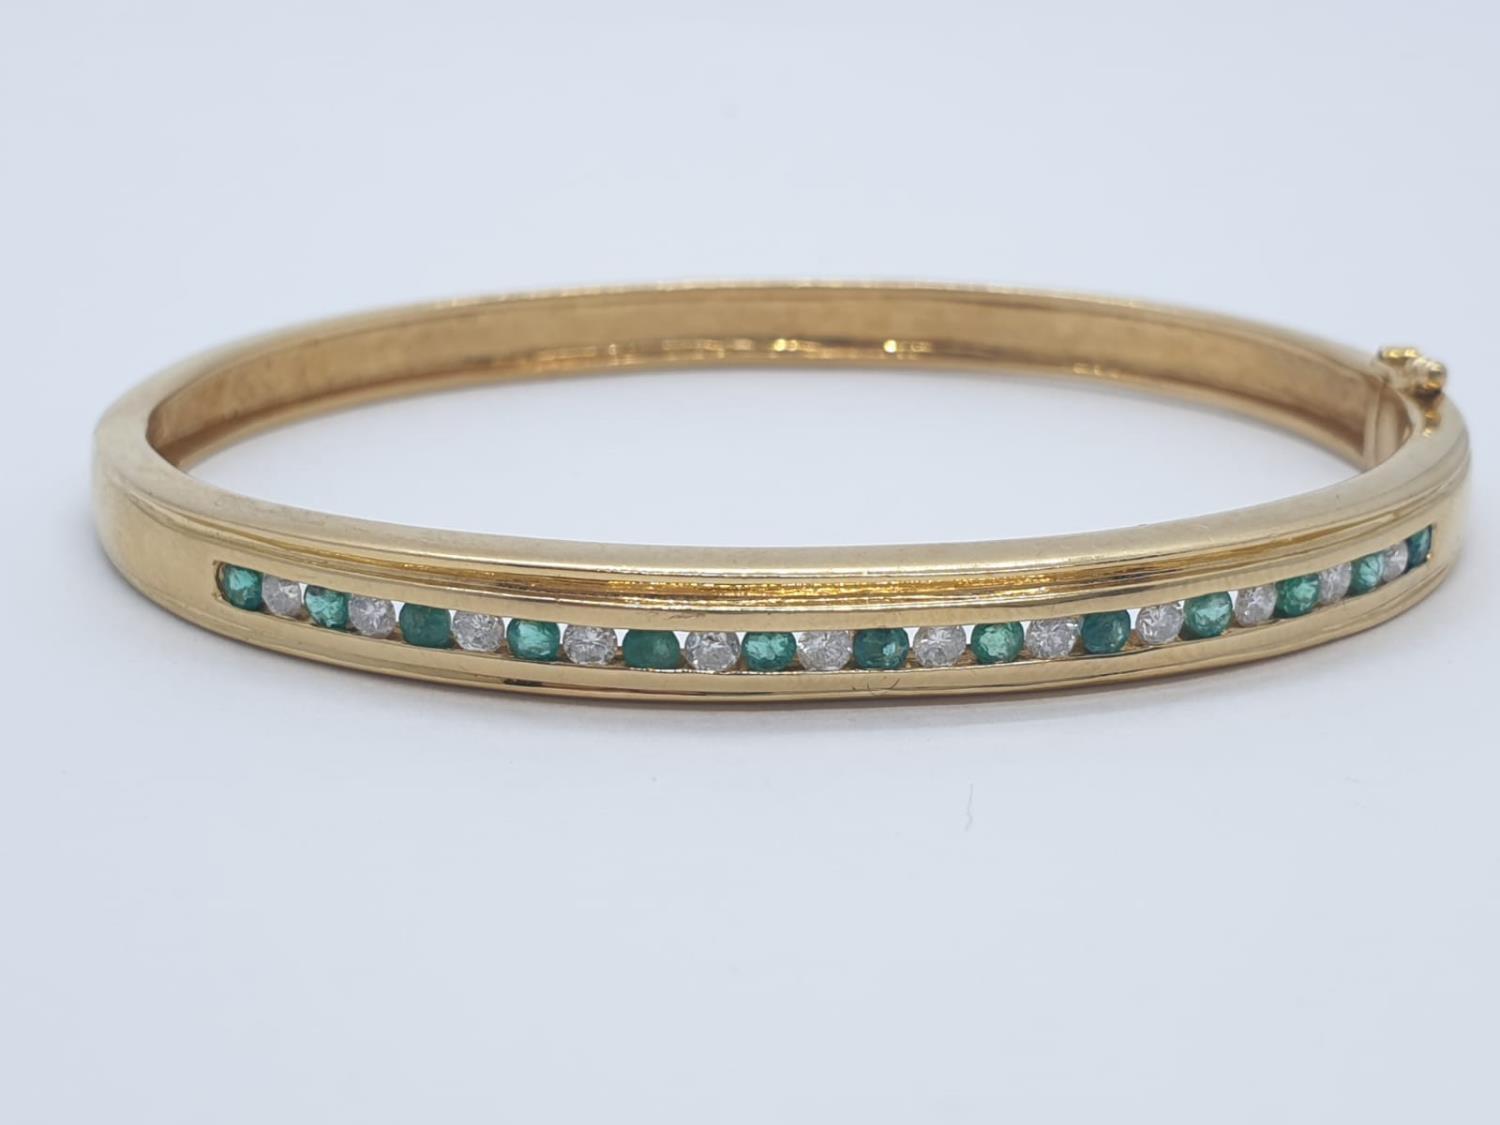 18CT Y/G DIAMOND & EMERALD BANGLE CHANNEL SET, WEIGHT 20G WITH 0.25CT DIAMONDS & 0.60CT EMERALD